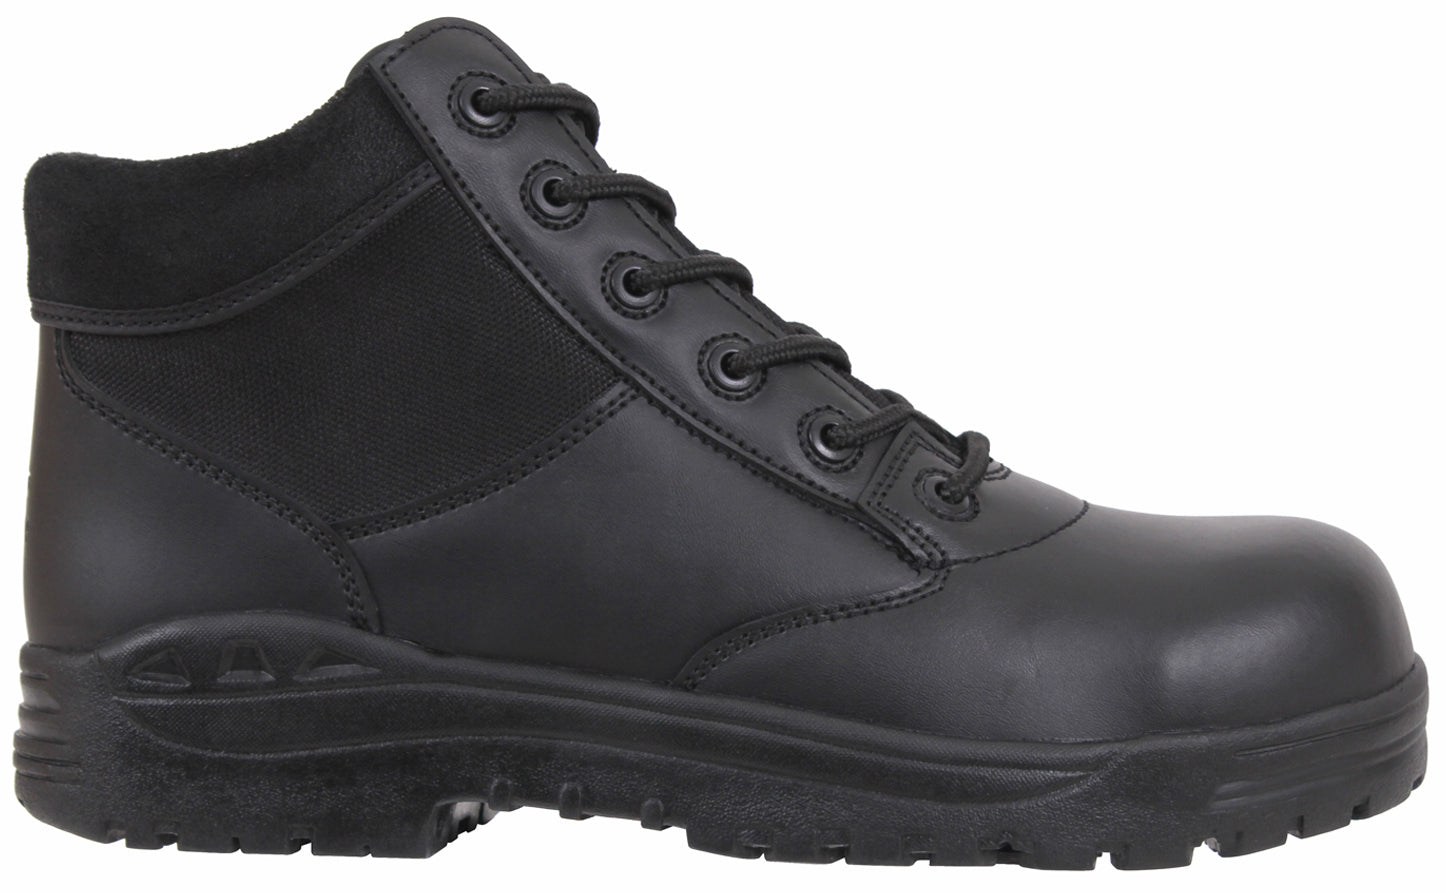 Rothco Forced Entry Composite Toe Tactical Boots - 6 Inch - Tactical Choice Plus